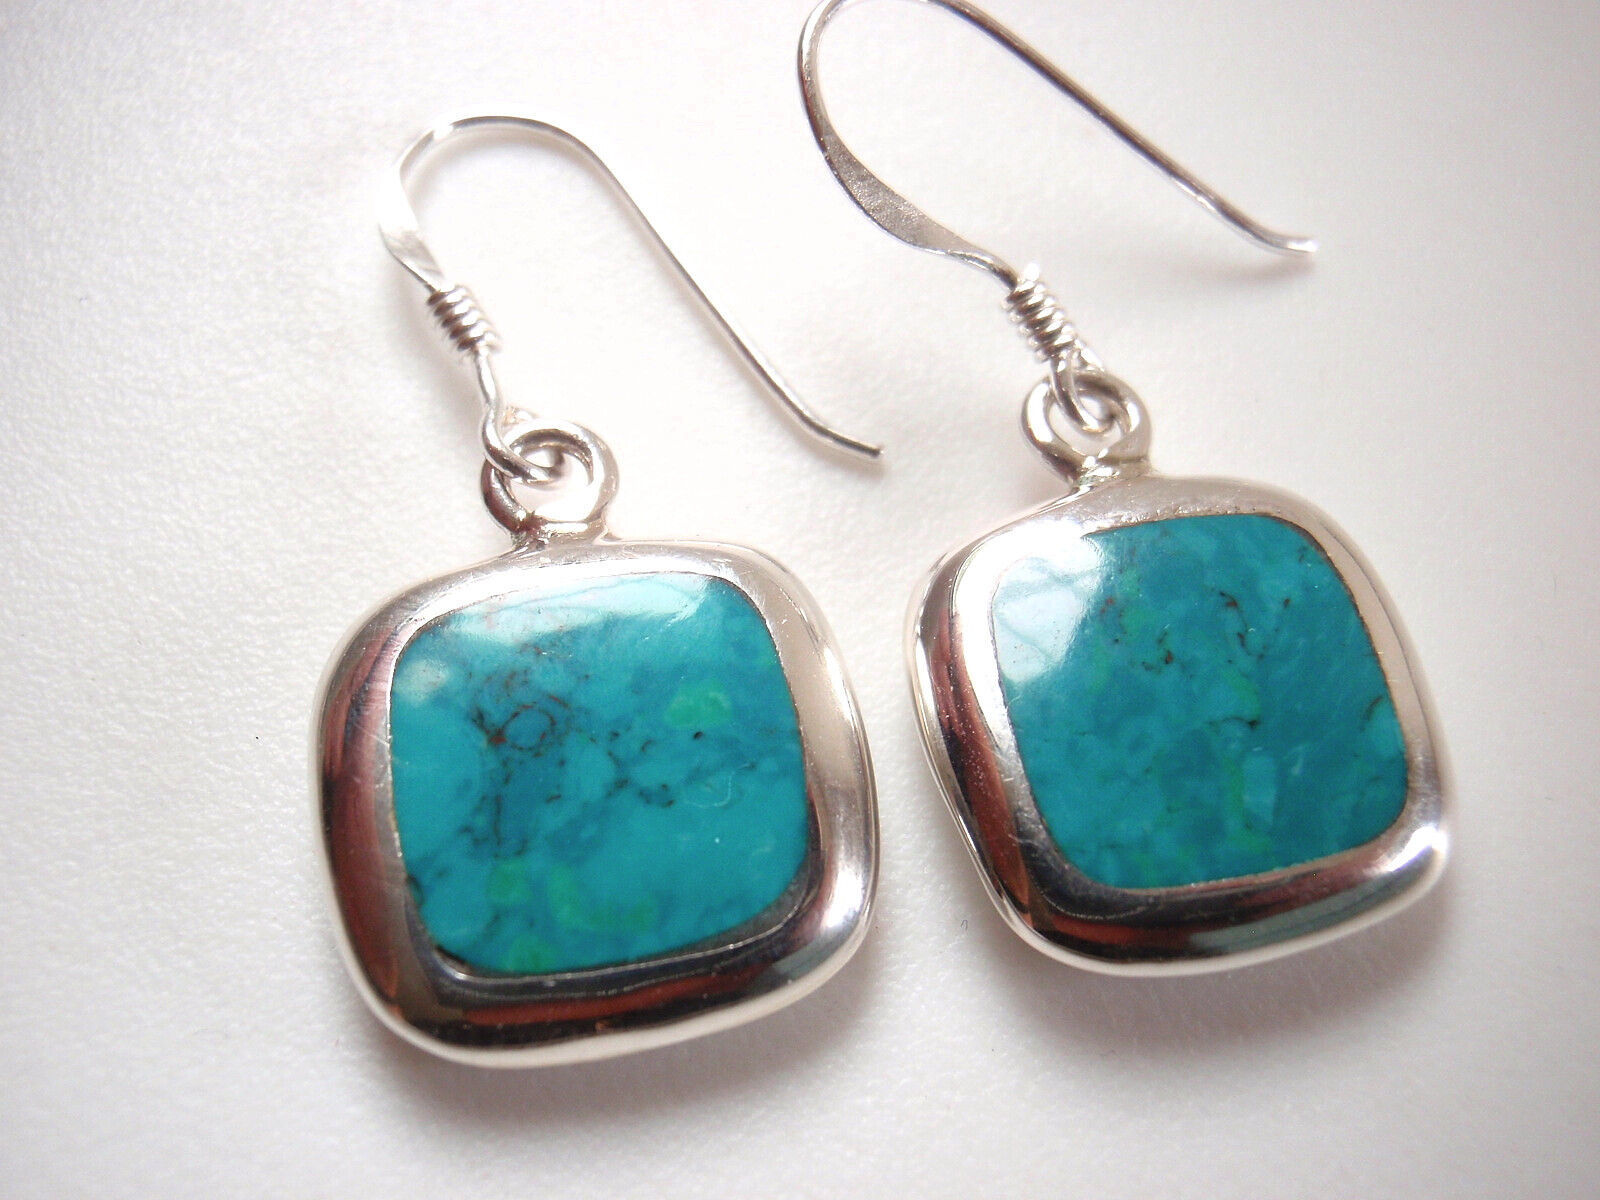 Simulated Turquoise Genuine Mother of Pearl 925 Sterling Silver Square Earrings - $17.99